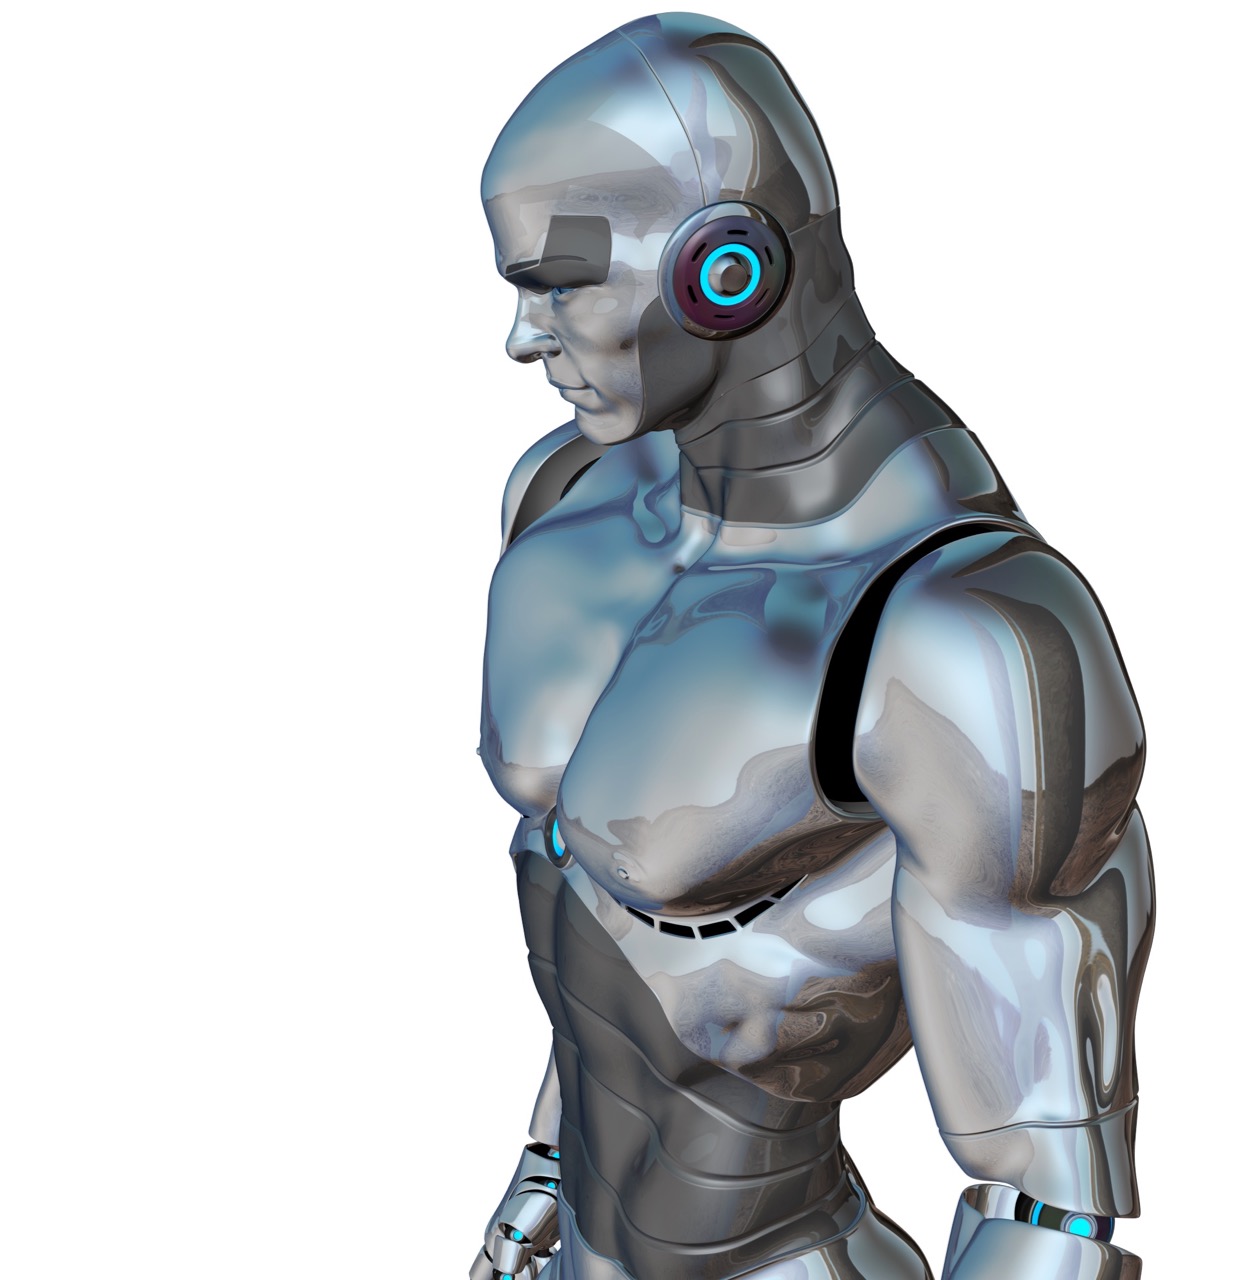 An Ultron-like Robot: Image by DrSJS from Pixabay 320276